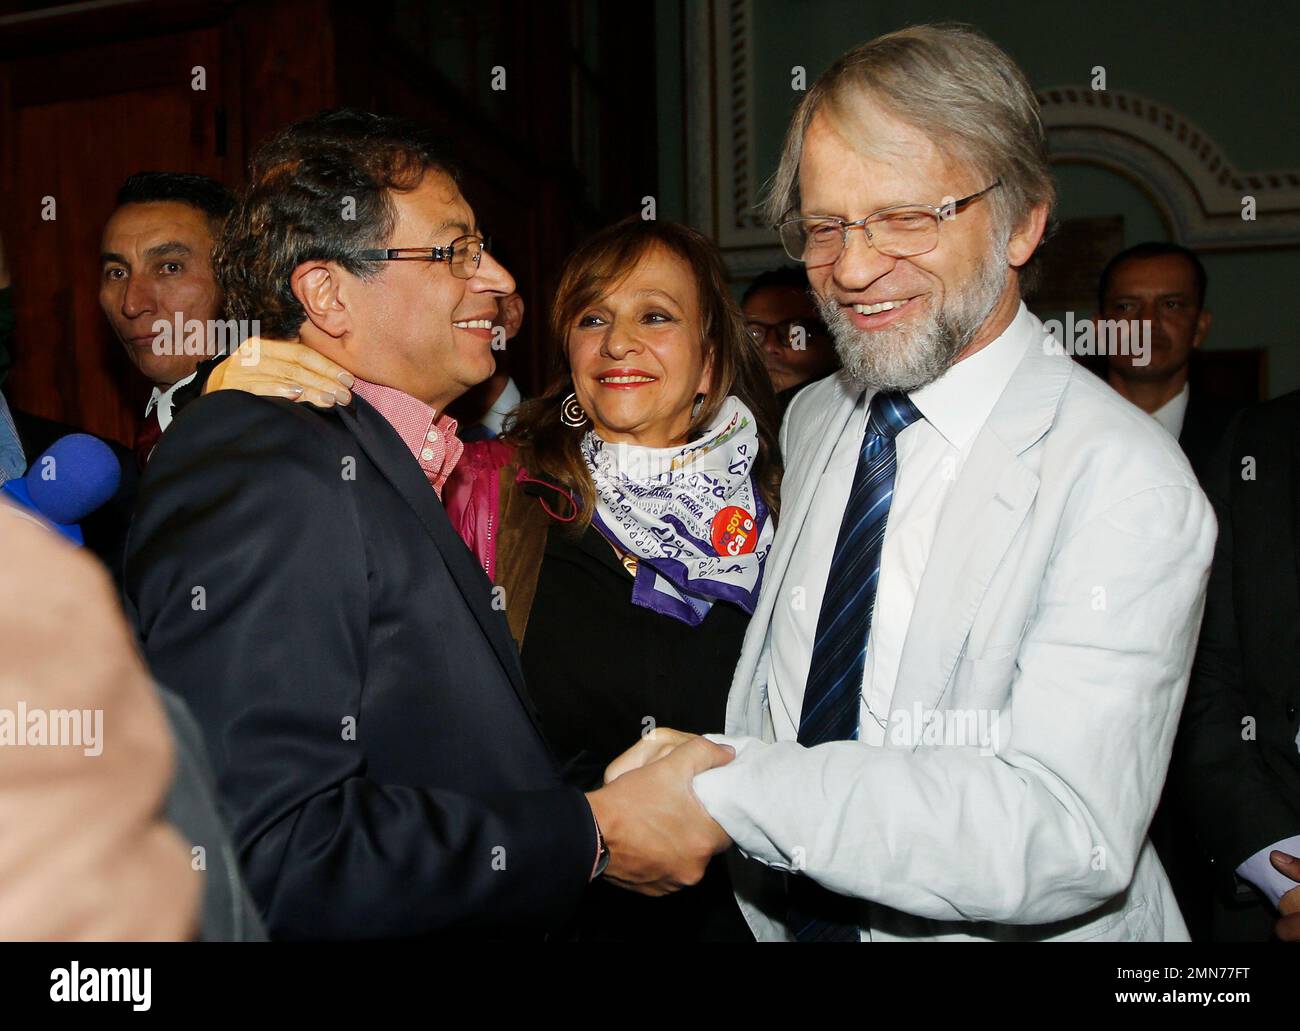 Standing next to his running mate Angela Robledo, Colombia Humana presidential candidate Gustavo Petro shakes hands with former Bogota Mayor Antanas Mockus, right, during a campaign rally in Bogota, Colombia, Friday, June 8, 2018. Petro will face Ivan Duque, presidential candidate for the Democratic Center, in a run-off election on June 17. (AP Photo/Fernando Vergara) Stock Photo